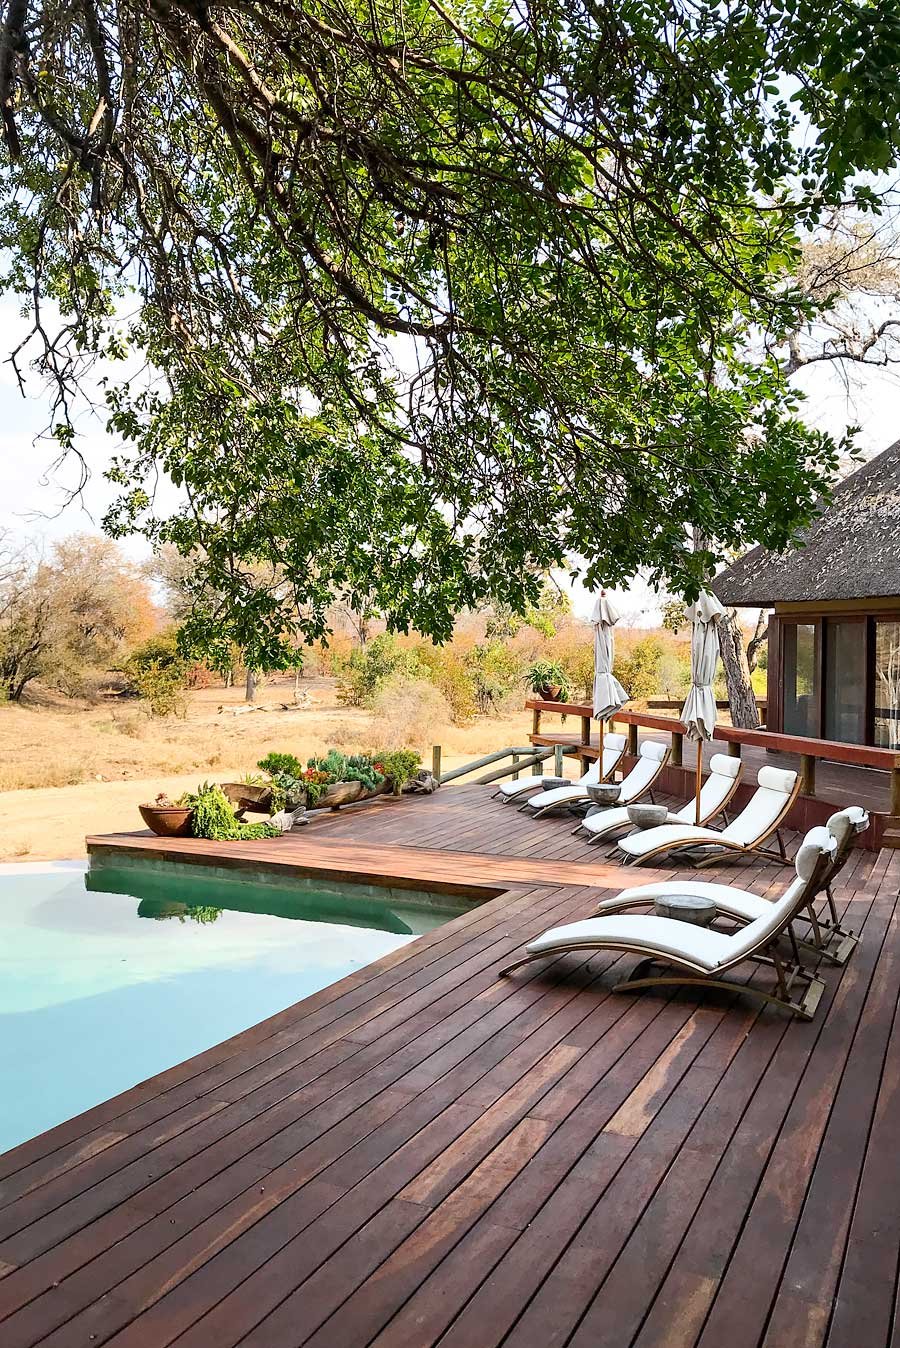 Klaserie Sands River Camp: Staying at a Luxury Safari Lodge in South Africa